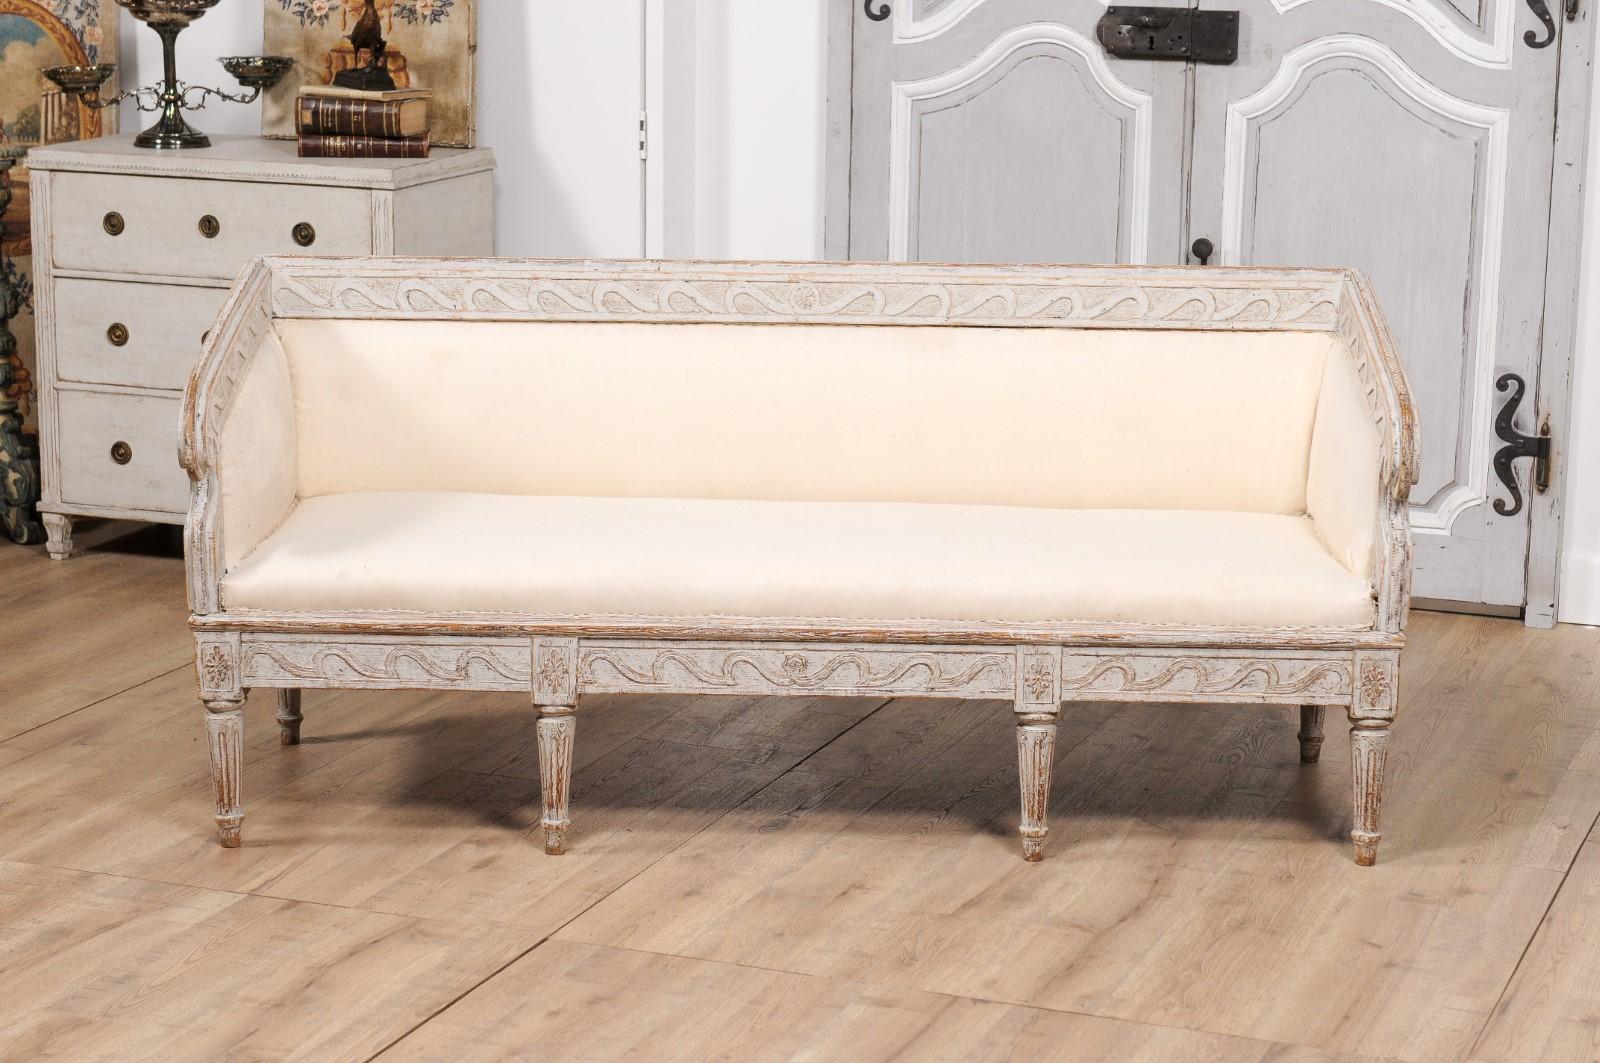 18th Century 1780s Gustavian Period Swedish Sofa with Carved Vitruvian Scroll Inspired Frieze